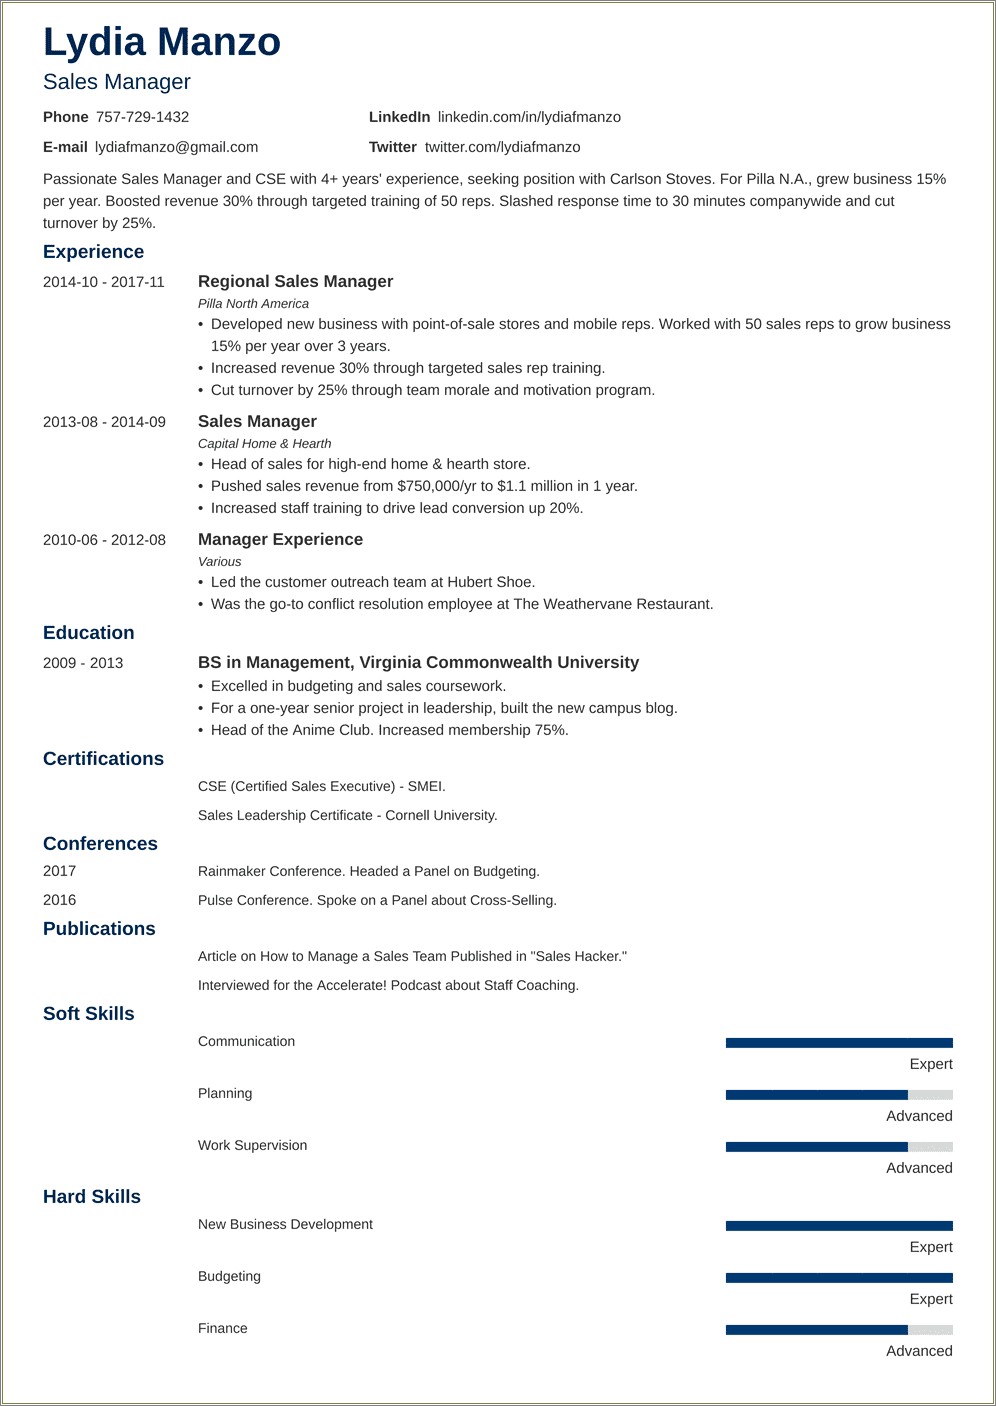 Resume Objective To Obtain A Management Position